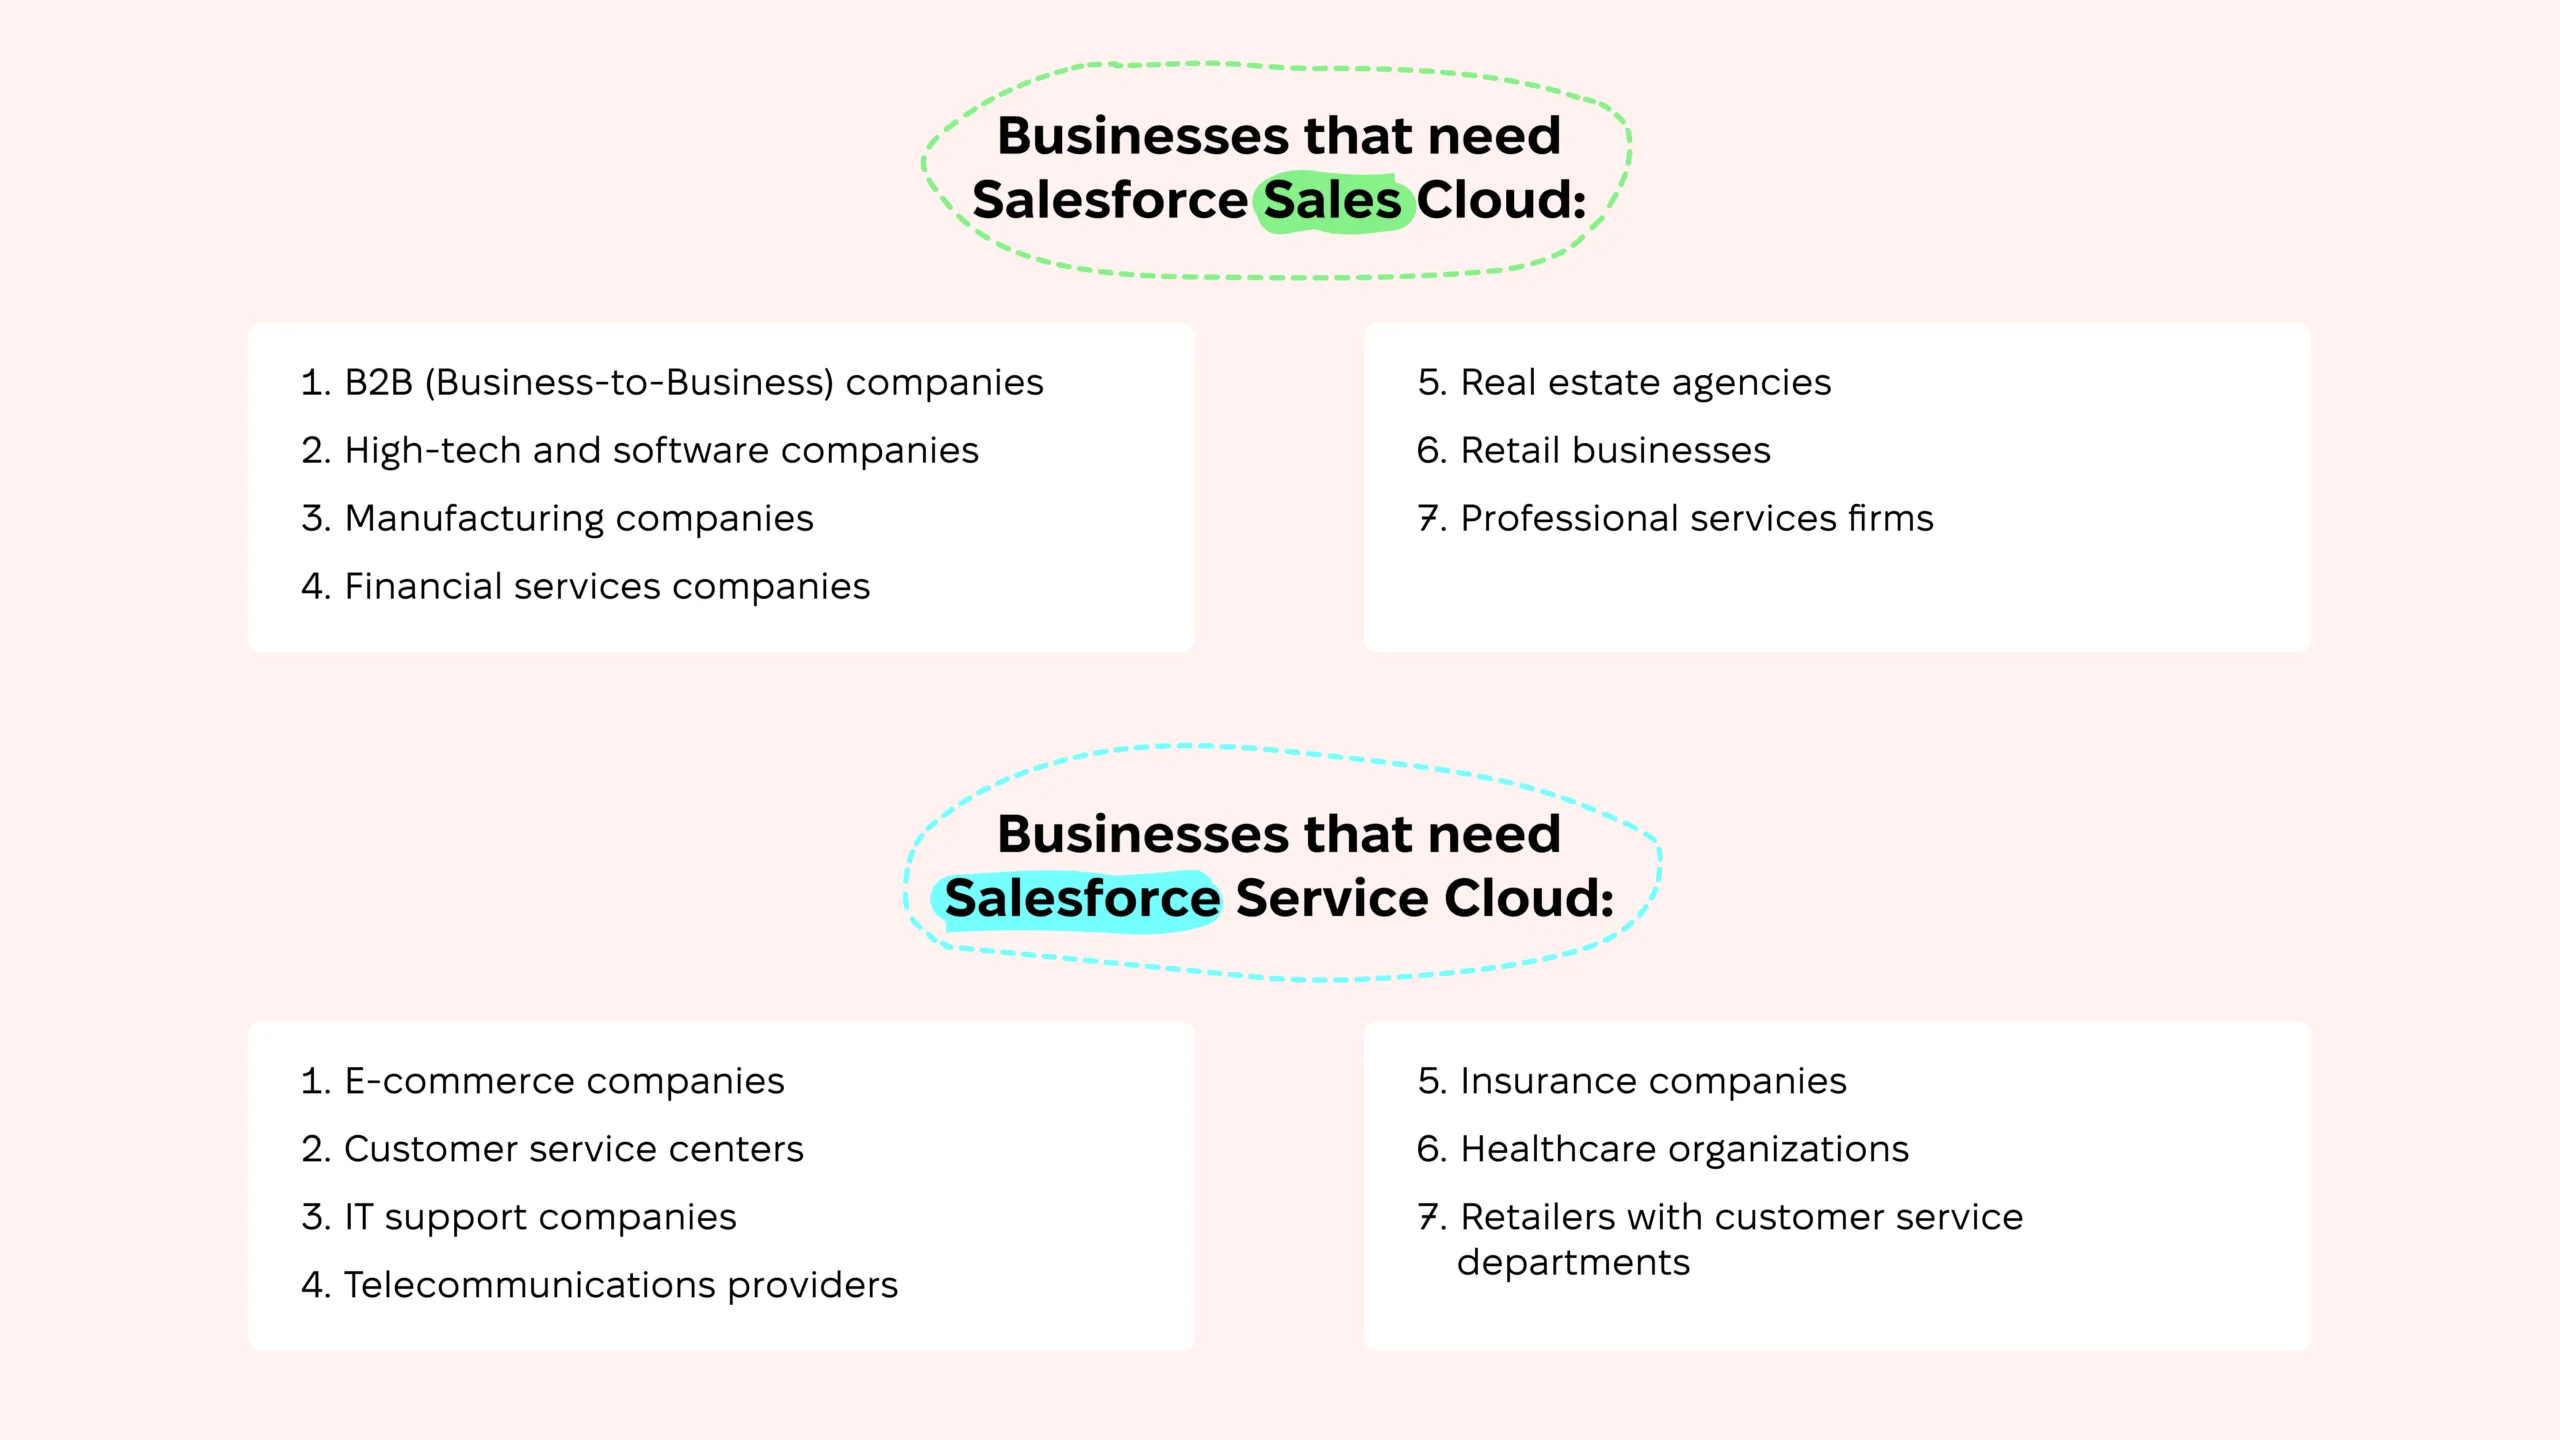 Businesses that need Salesforce Sales and Salesforce Service Cloud